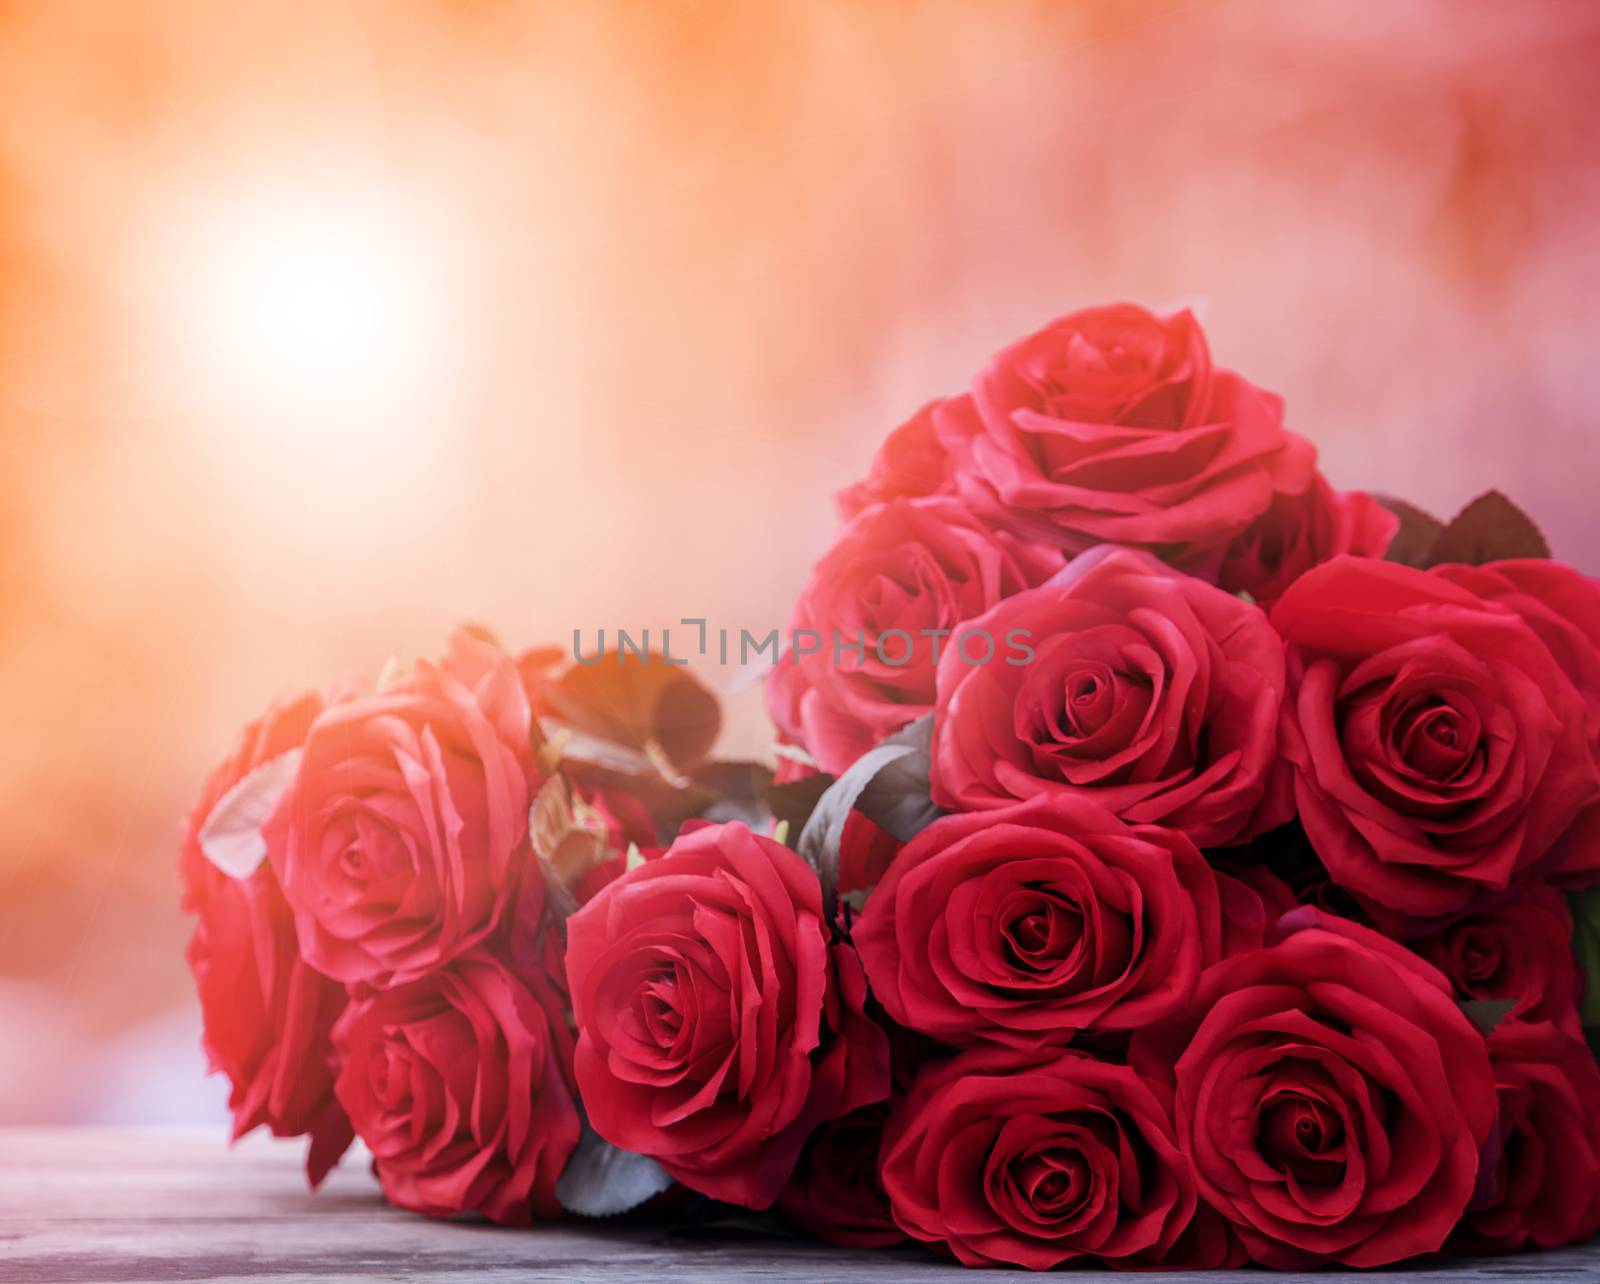 close up beautiful red roses bouguet with glowing light backgrou by khunaspix